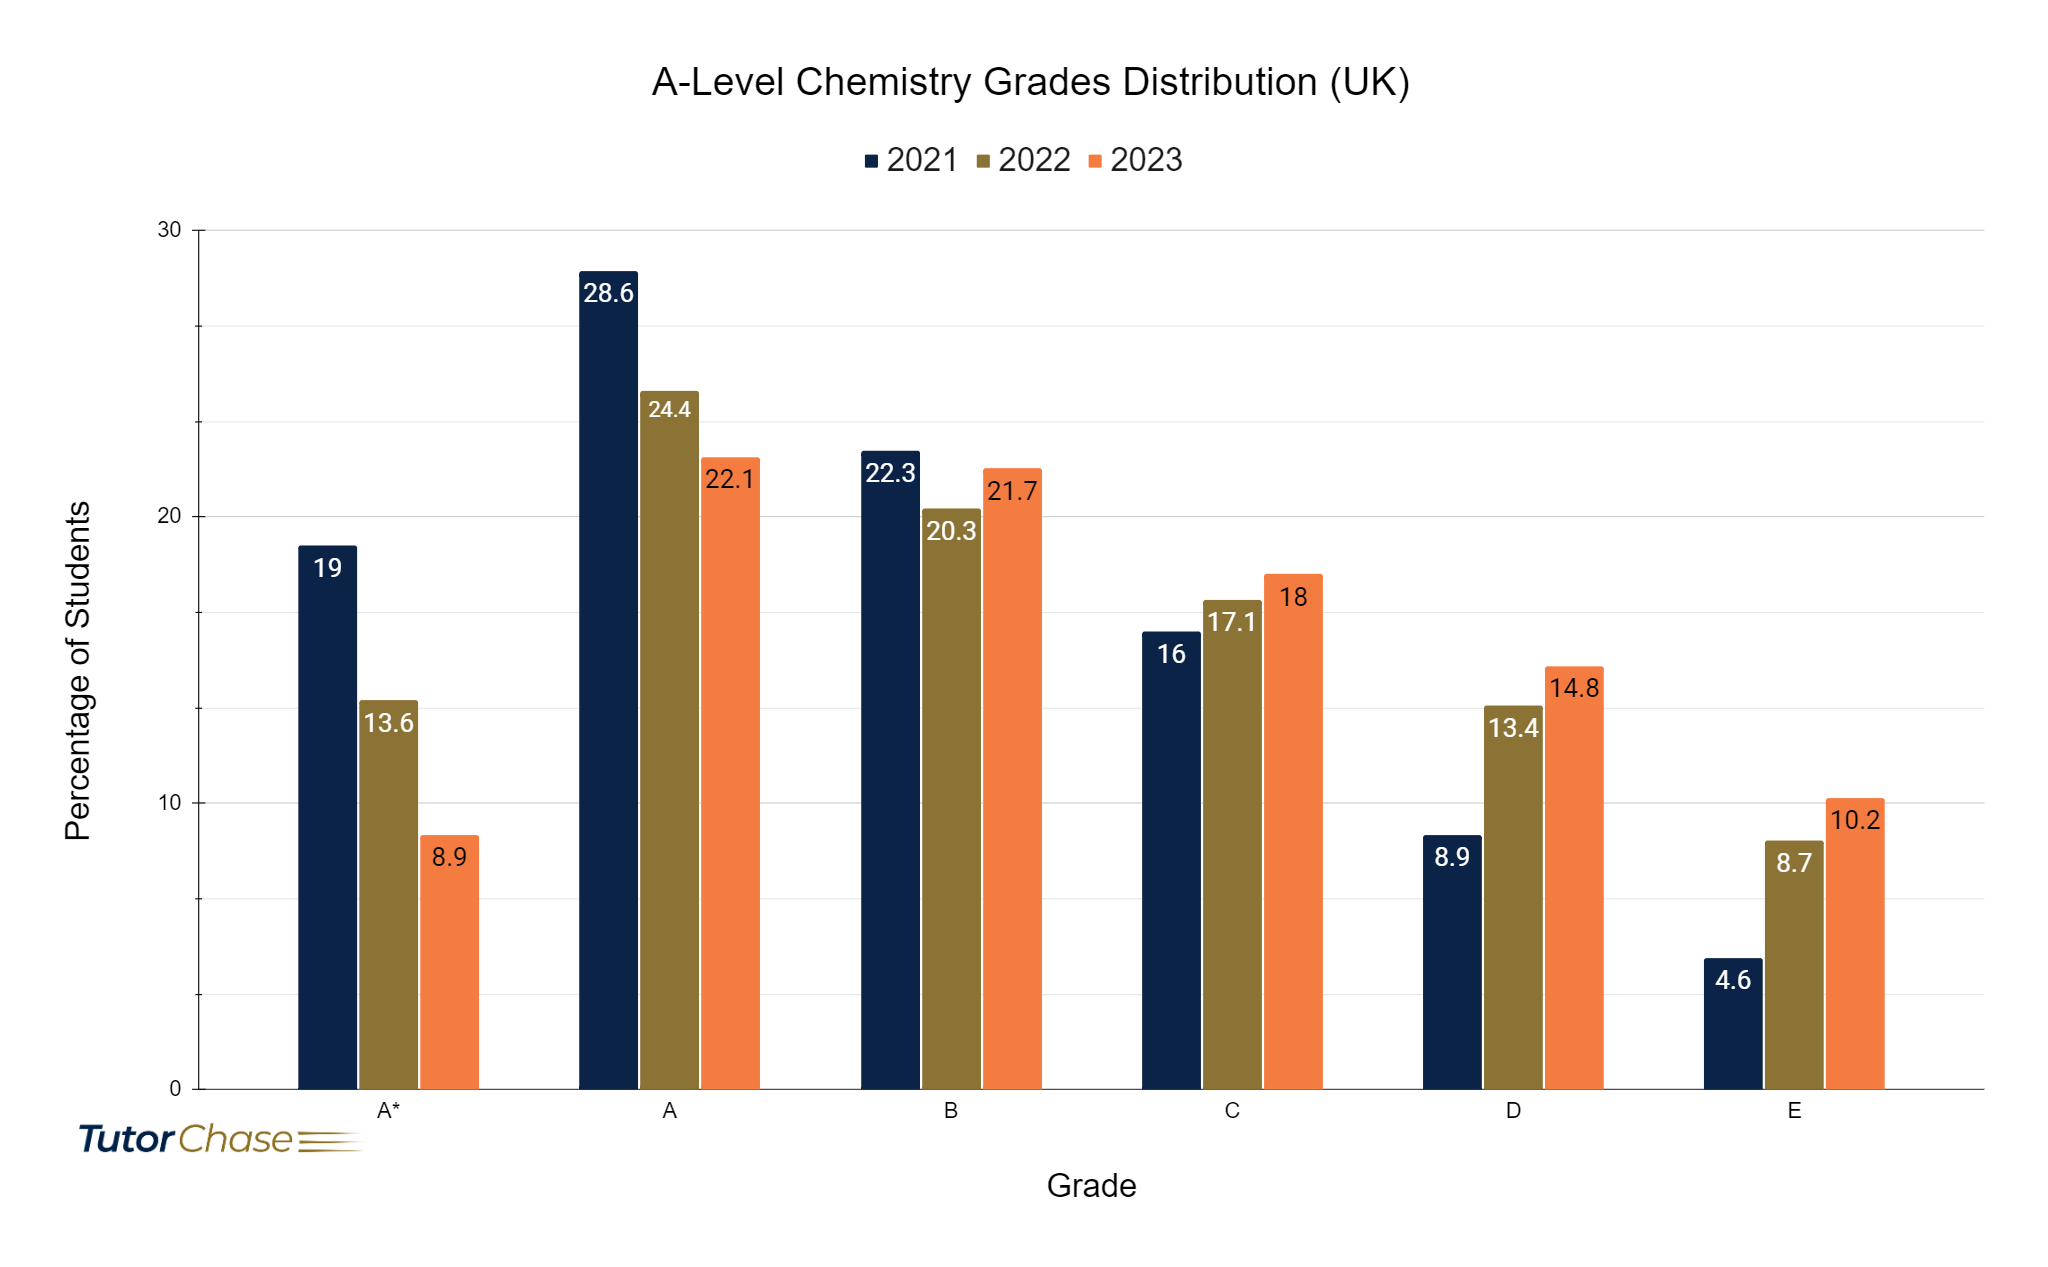 Grades distribution of A-Level Chemistry in UK 2021-2023